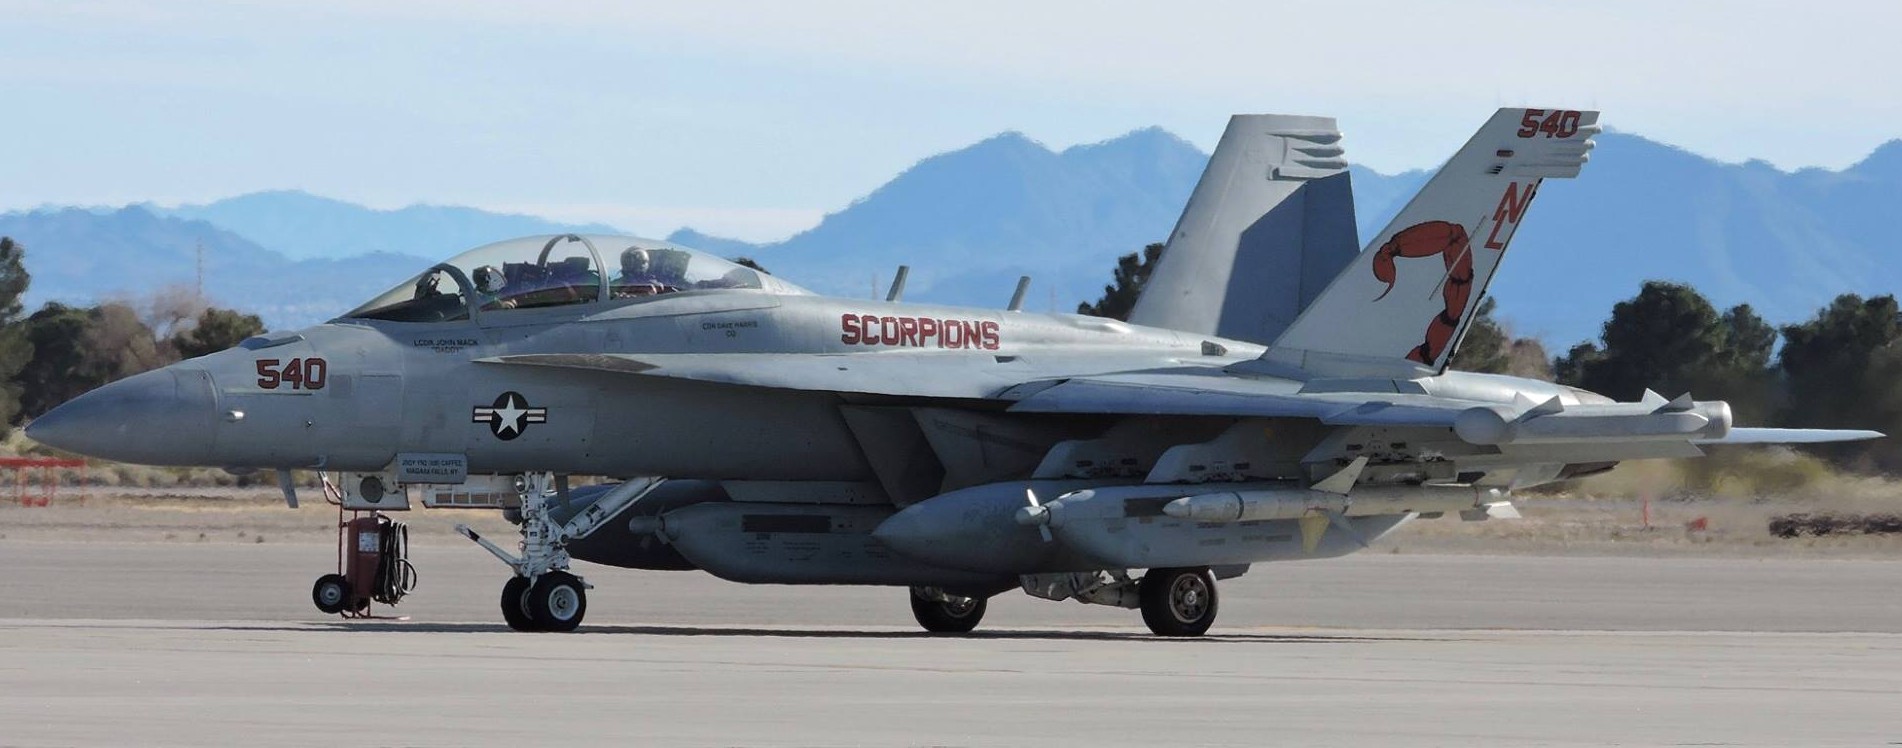 vaq-132 scorpions electronic attack squadron vaqron us navy boeing ea-18g growler exercise red flag nellis afb nevada 25